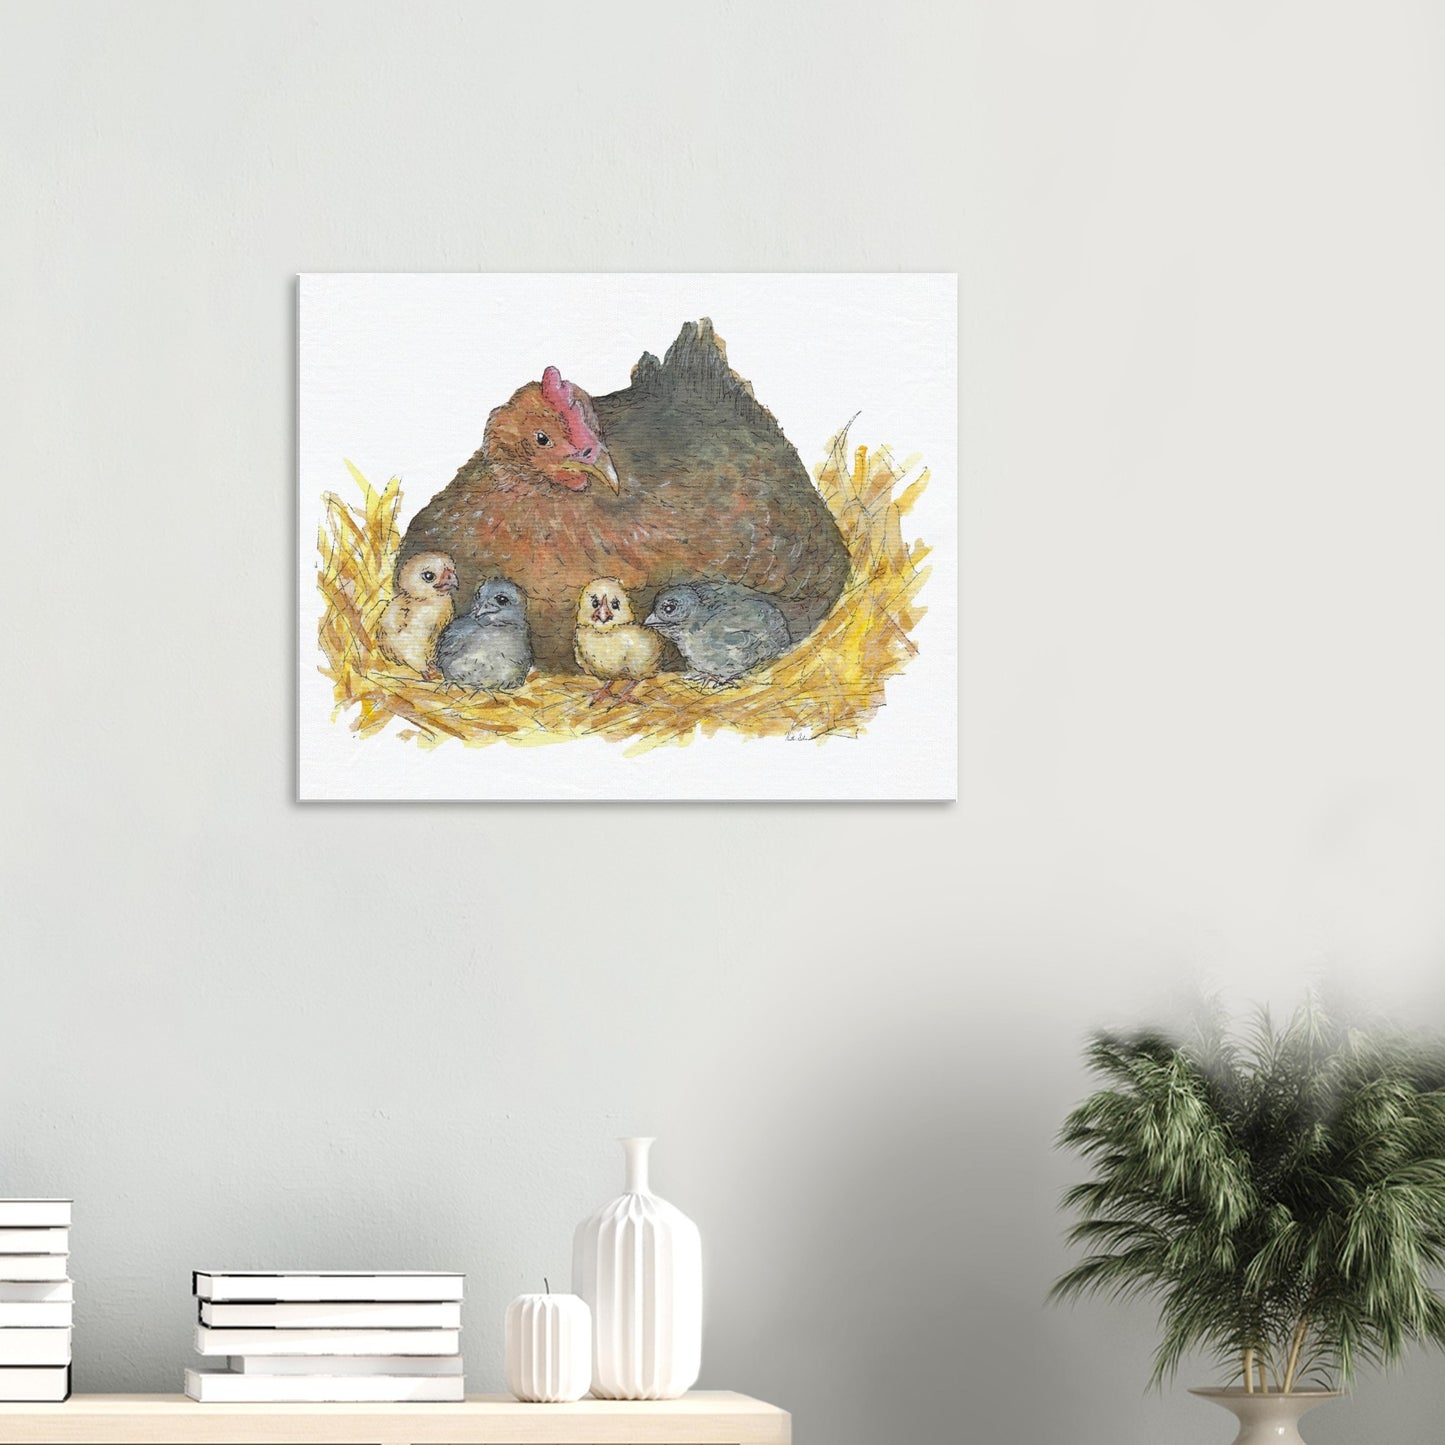 24 by 30 inch slim canvas Mother Hen print. Features a watercolor mother hen and her four chicks in a nest. Shown on wall above shelf with books and a potted plant.